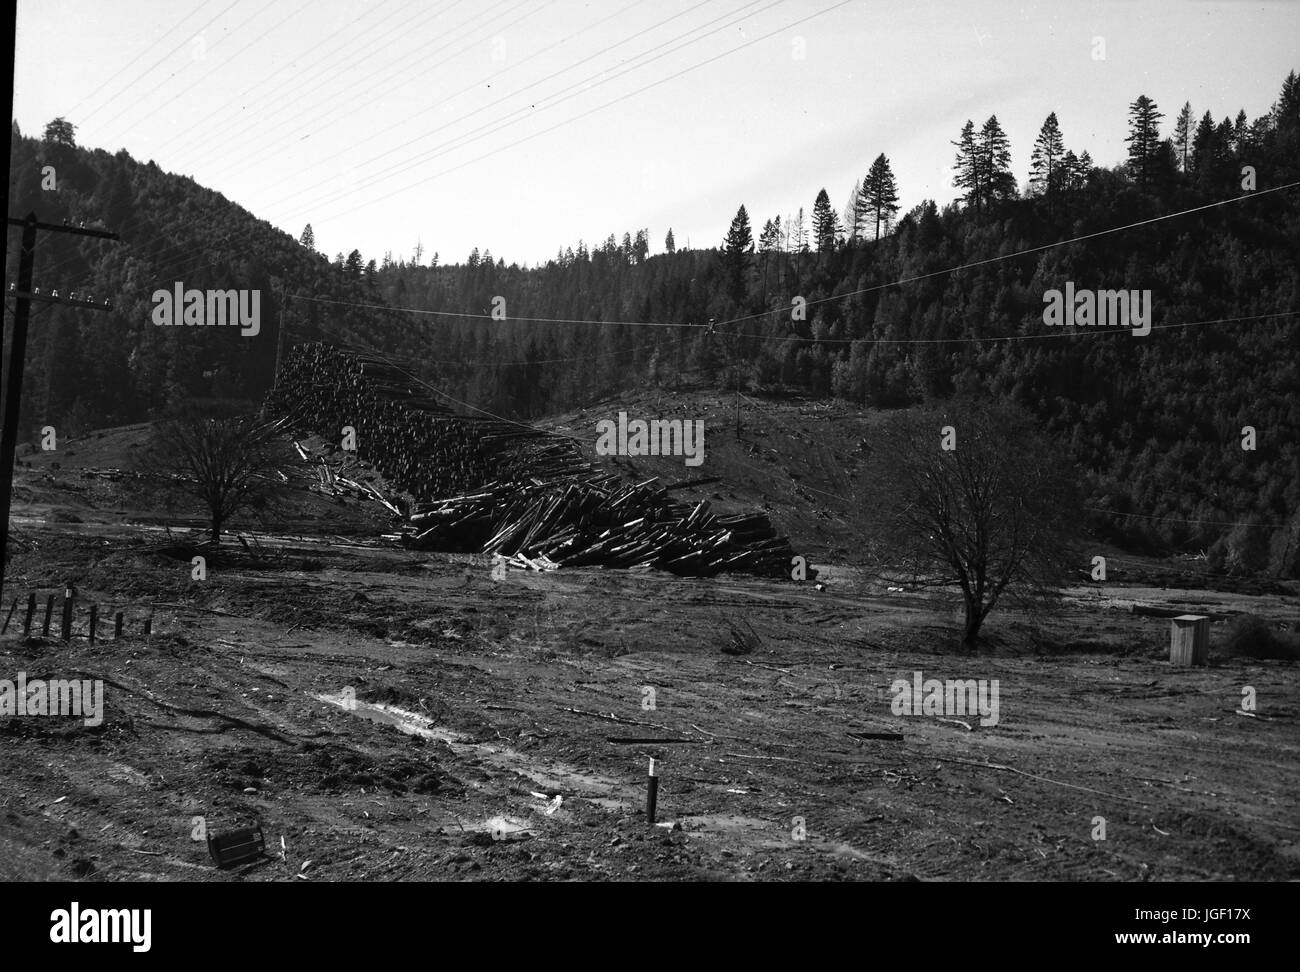 A large pile of logs from felled trees is visible in a forested area, with an overhead wire crane used to move the logs and a clear cut, barren area visible in the foreground, California, 1950. Stock Photo